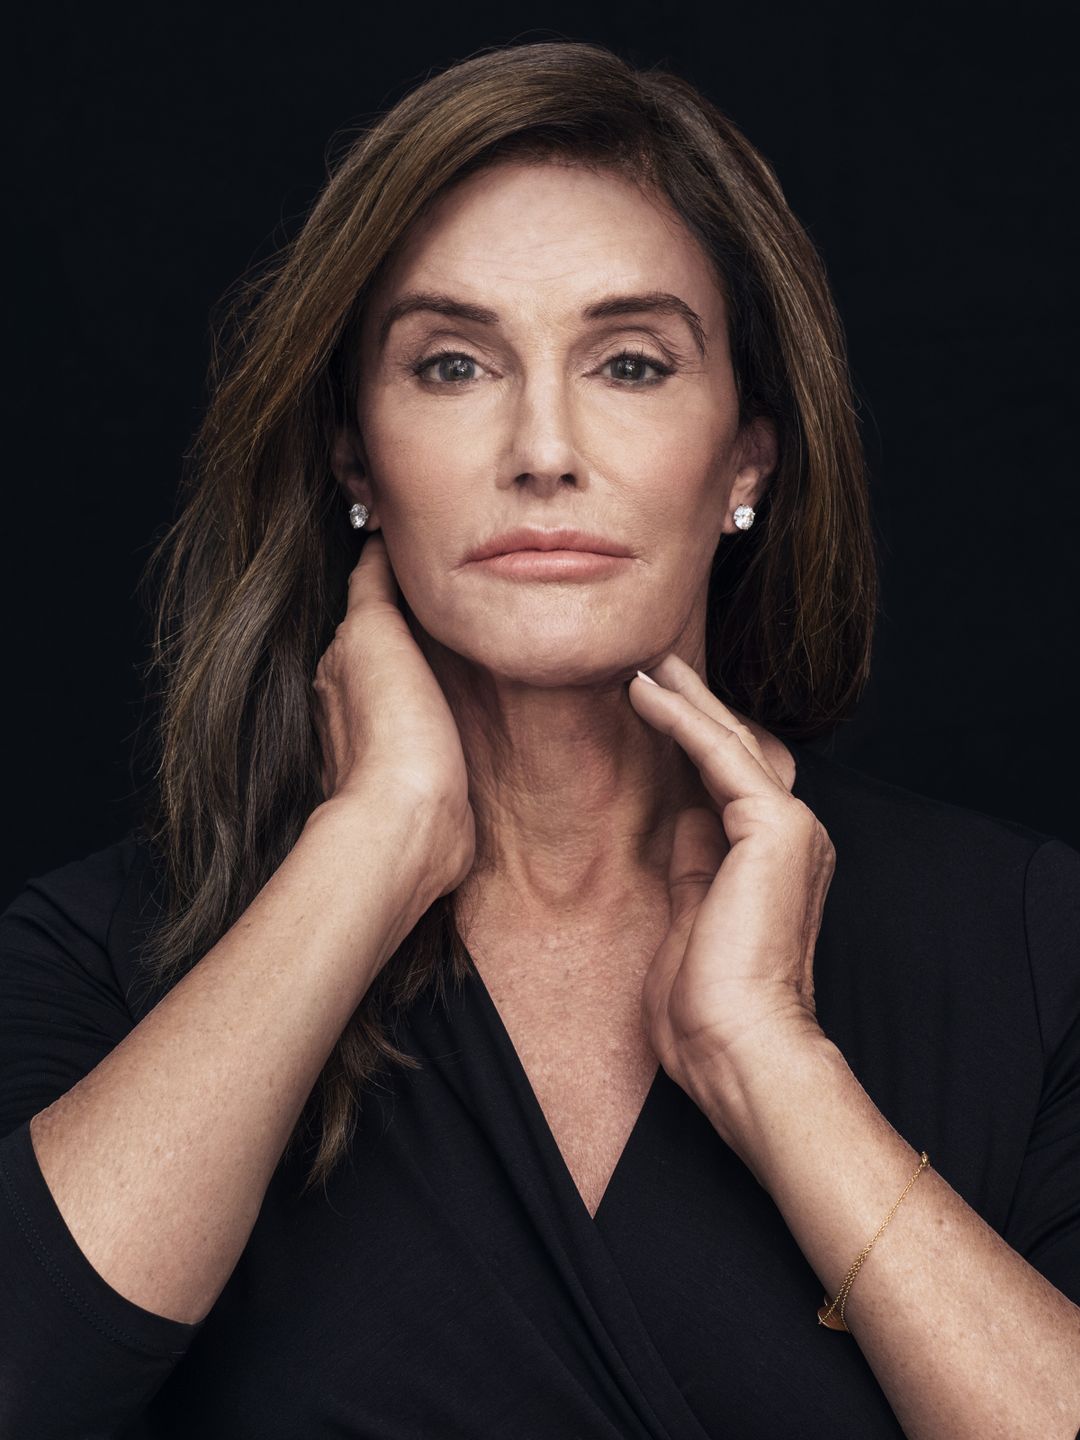 Caitlyn Jenner personal life